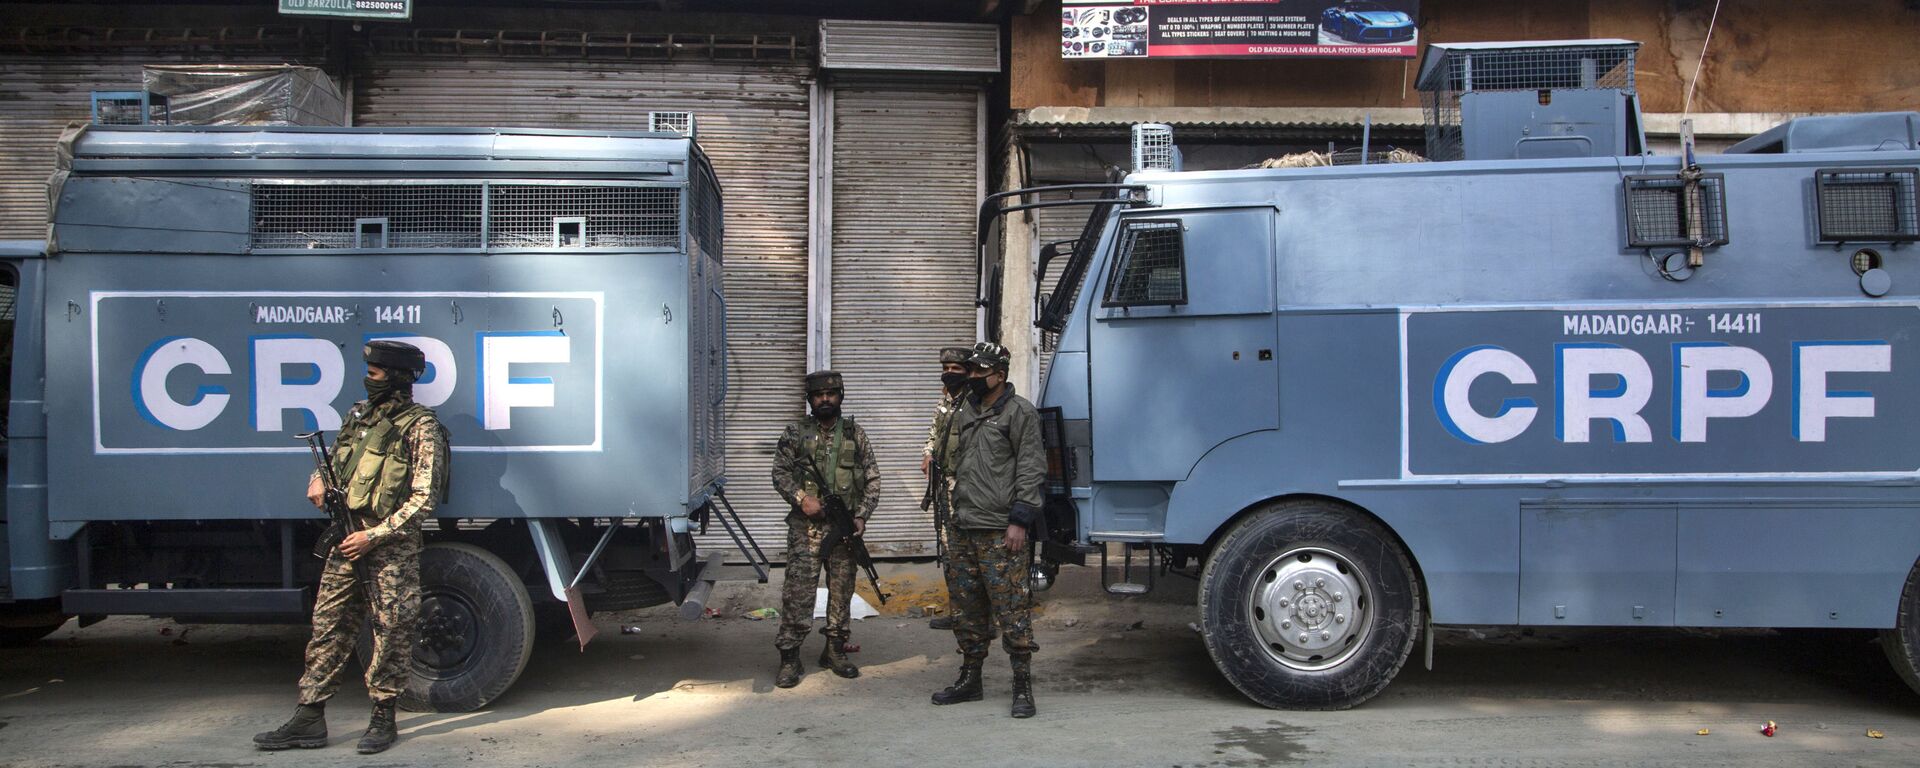 Indian Central Reserve Police Force (CRPF) soldiers guard during a gunfight between Indian government forces and suspected rebels in Srinagar, Indian controlled Kashmir, Monday, Oct. 12, 2020 - Sputnik International, 1920, 11.06.2021